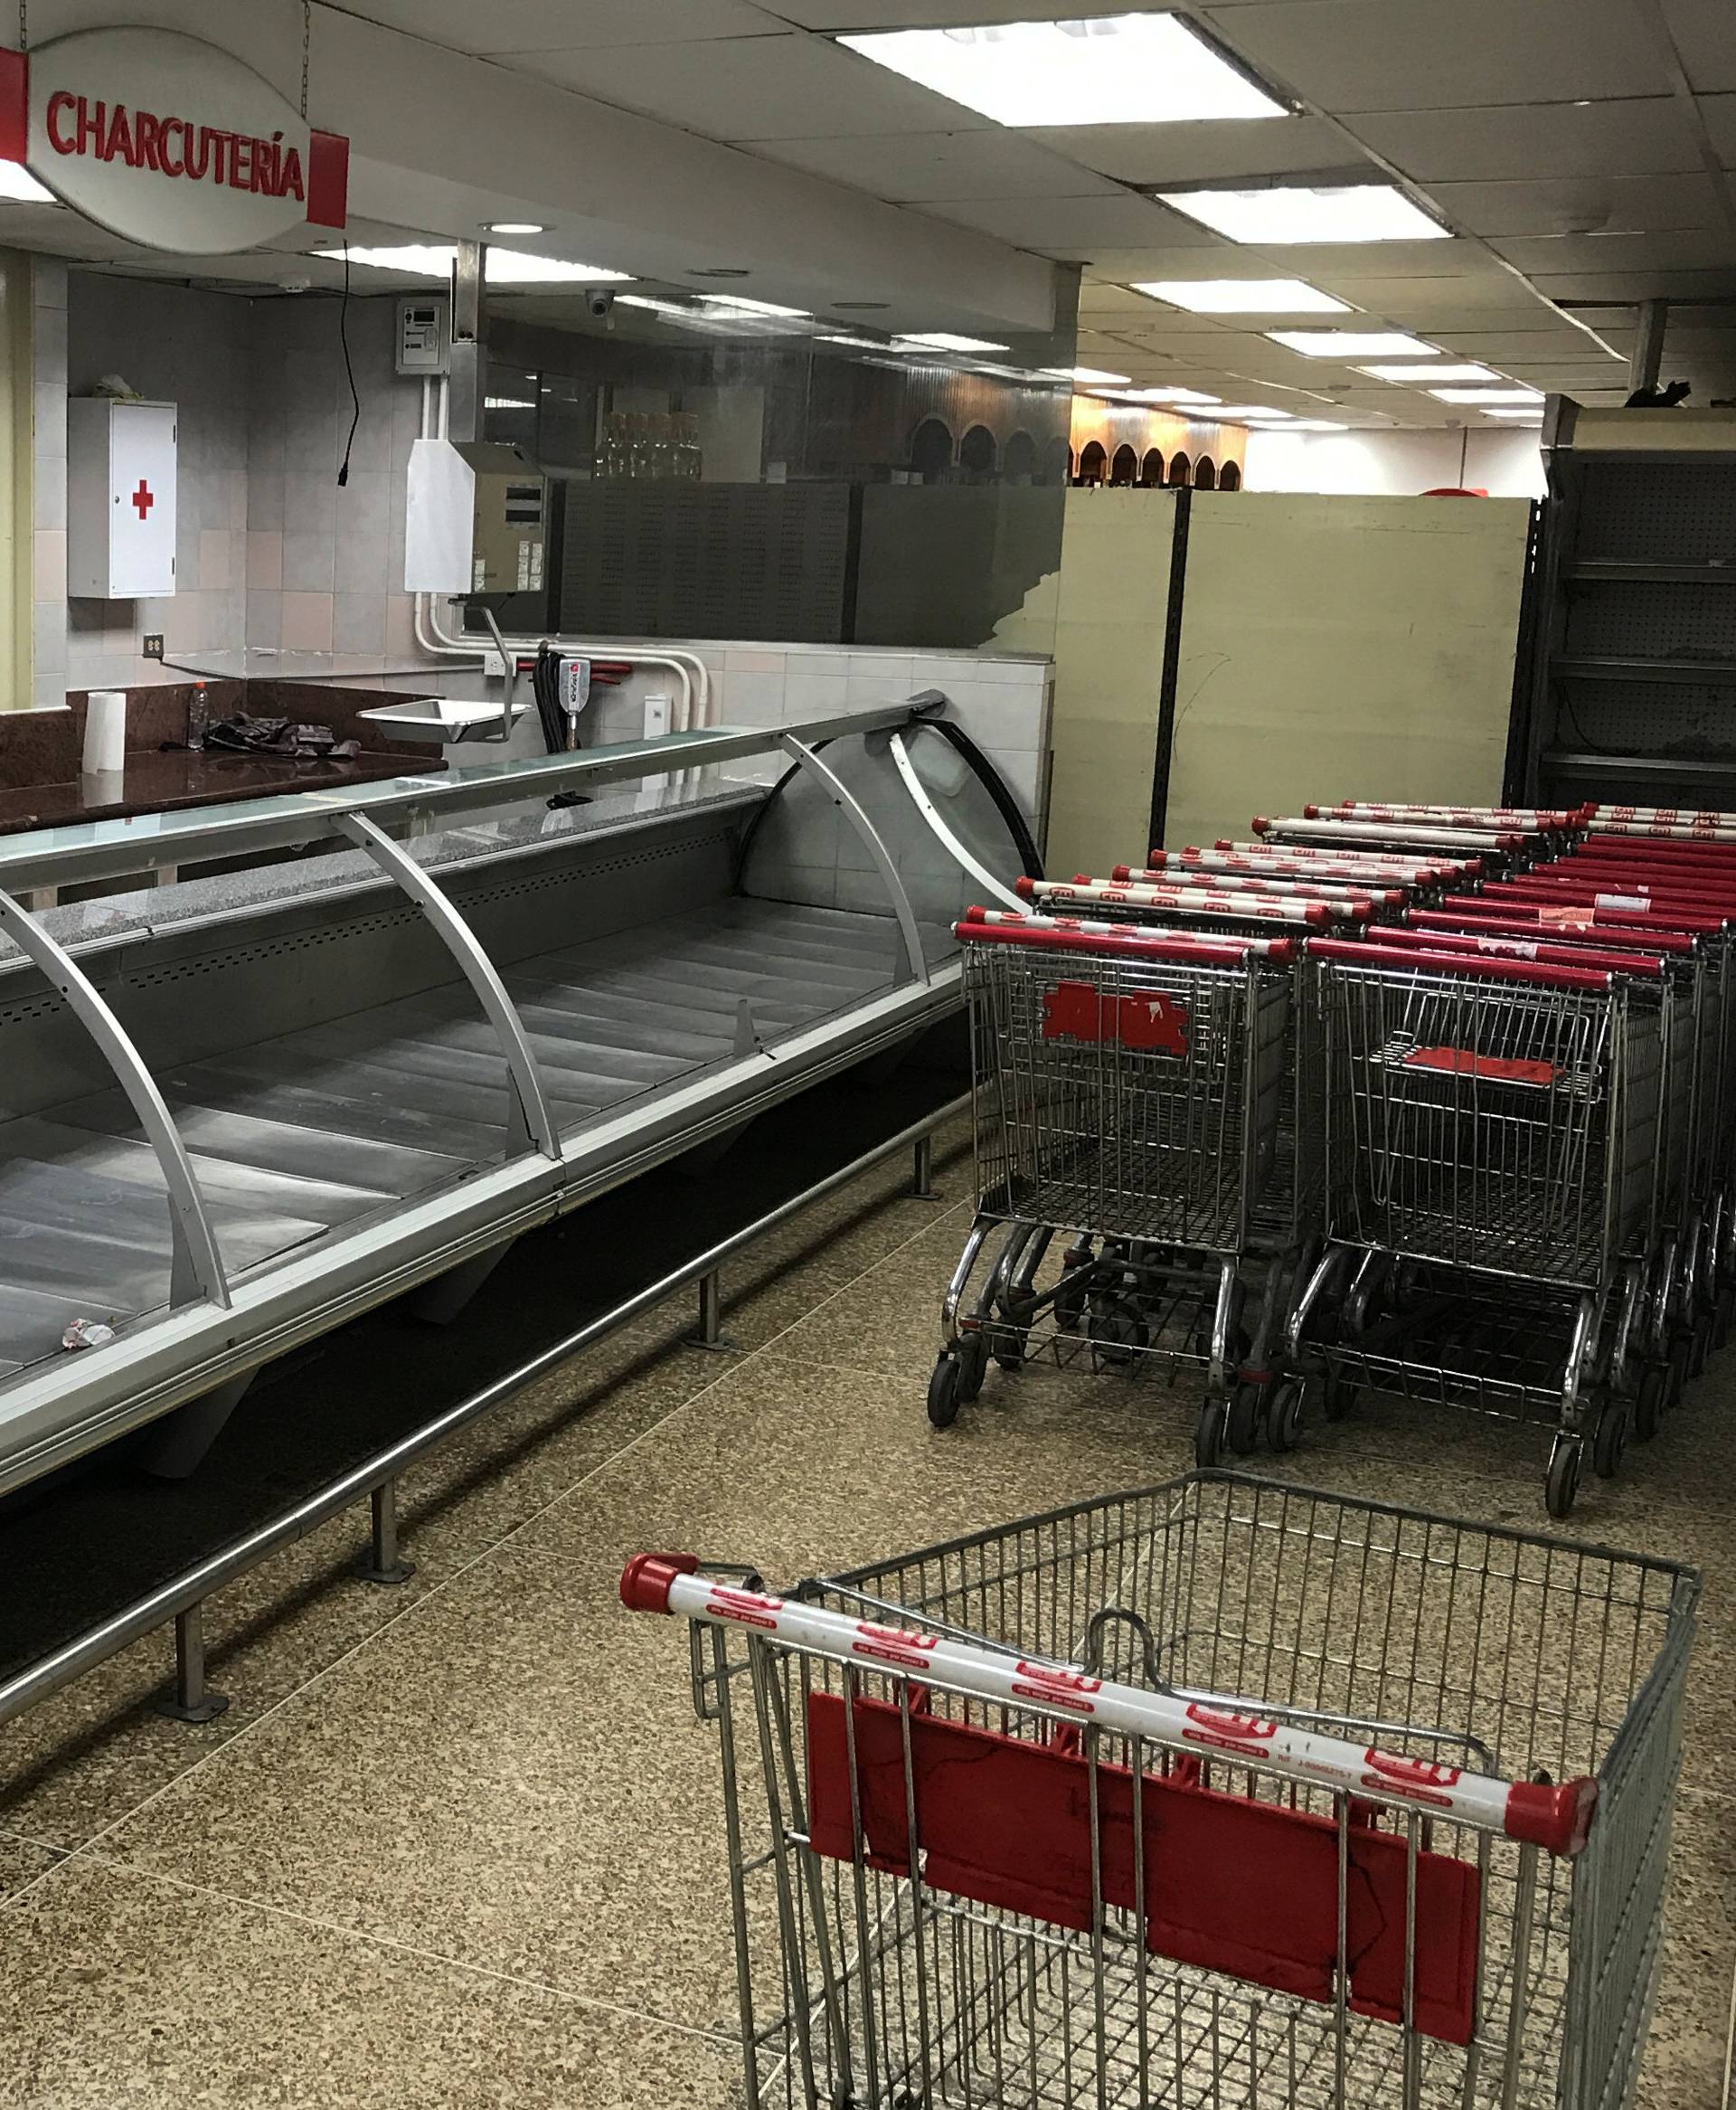 Stacked shopping carts are seen next to empty refrigerators at the deli area at a supermarket in Caracas